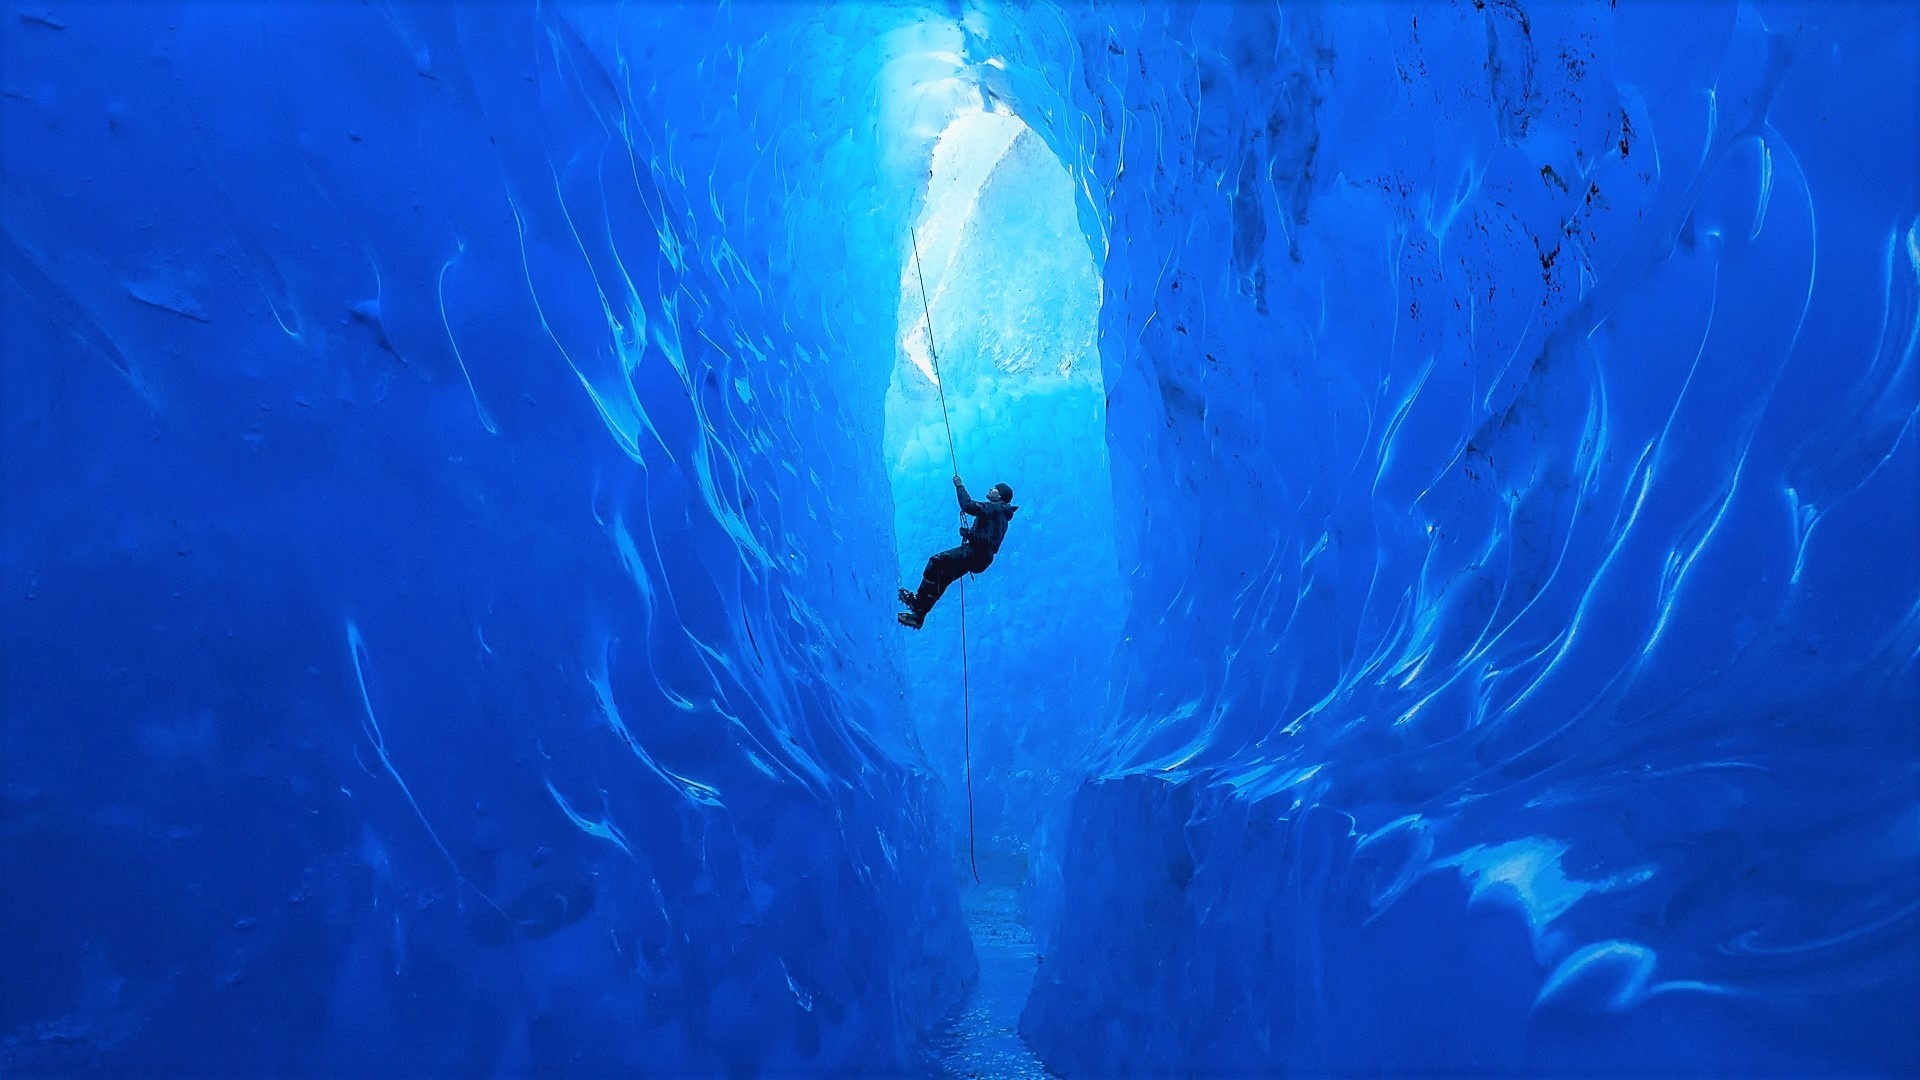 Ice Climbing: Glacier Ice, Ice Climbing, Sports, Winter, Fully-Equipped And Ready For Challenges. 1920x1080 Full HD Background.